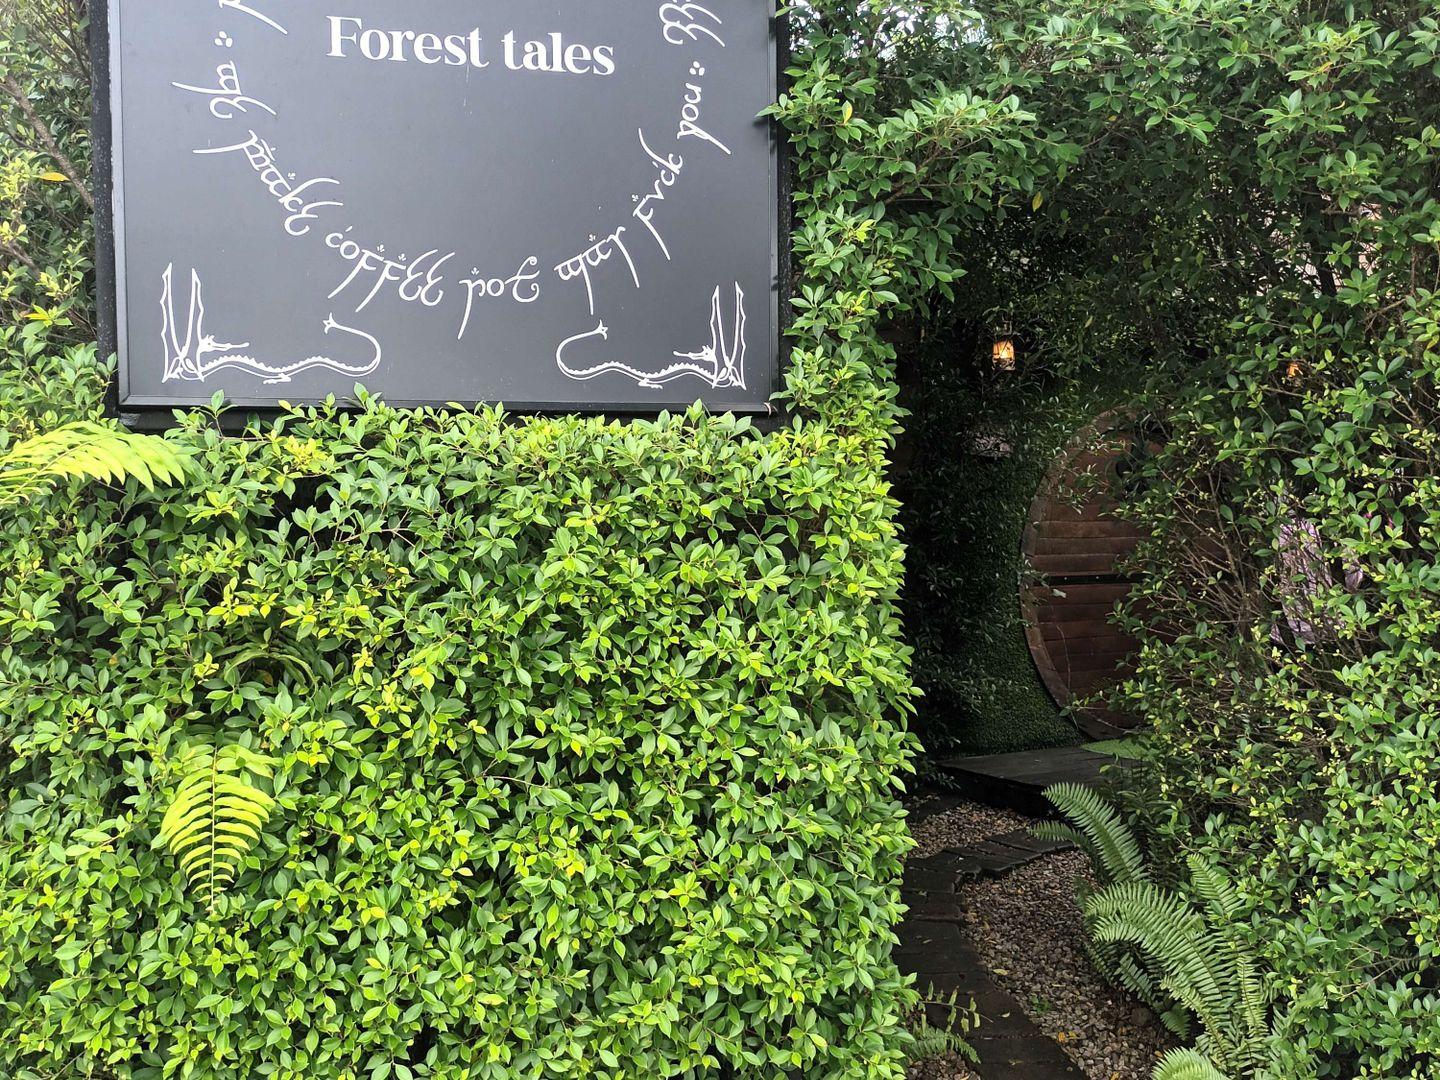 Forest tales